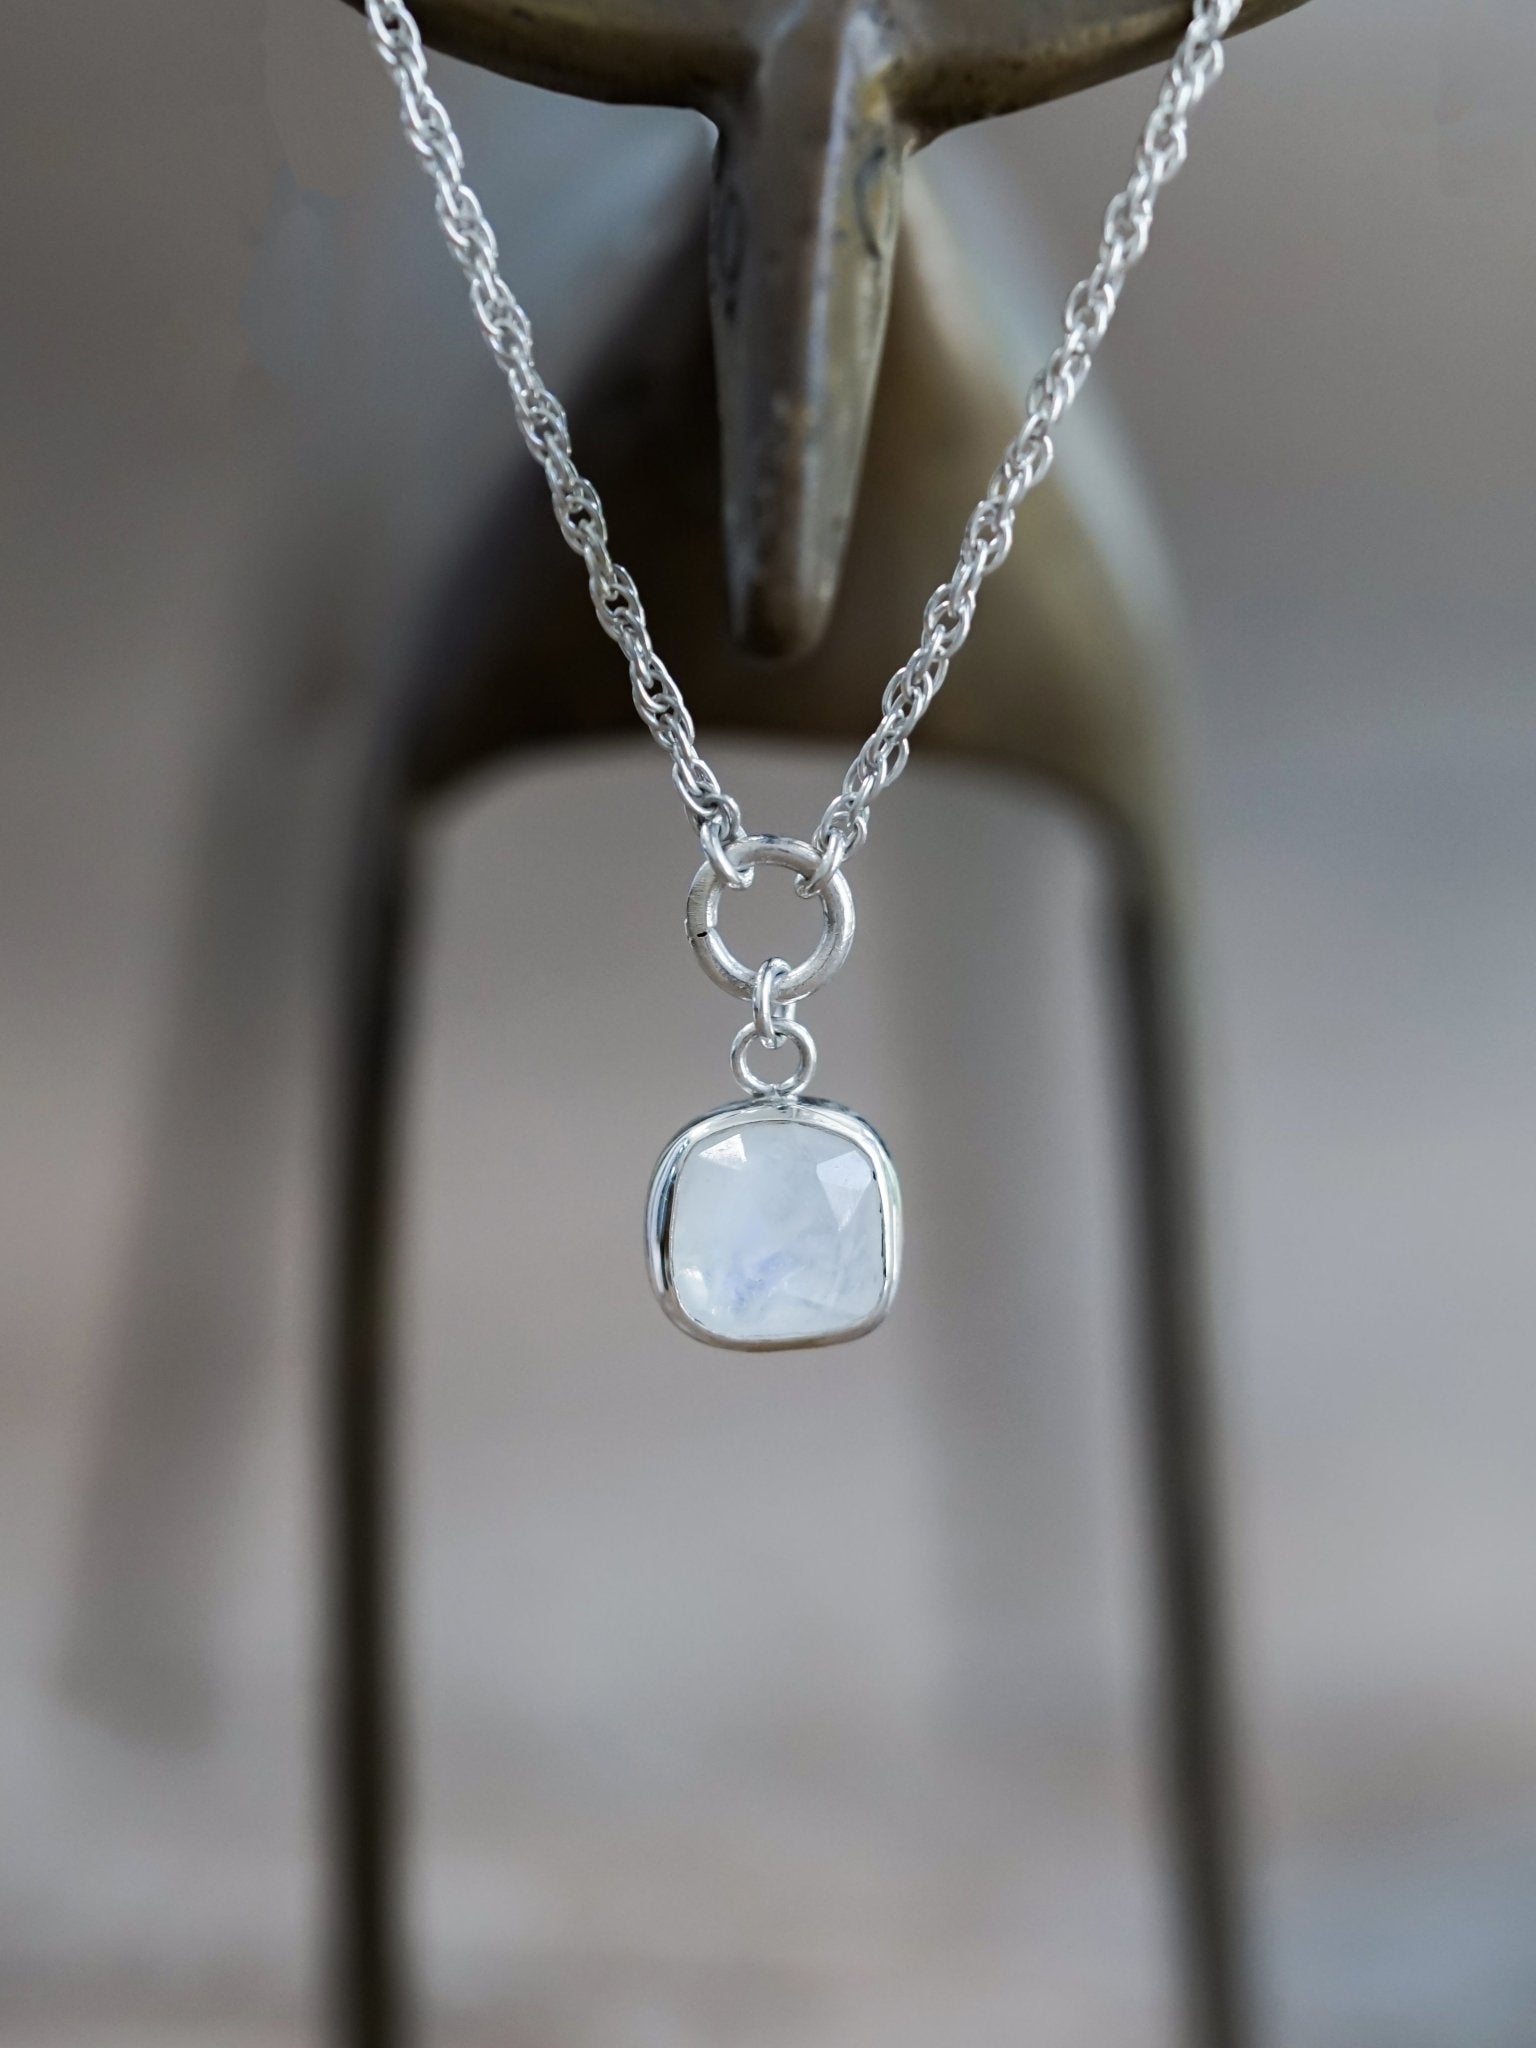 Exceptional rainbow moonstone beads silver necklace